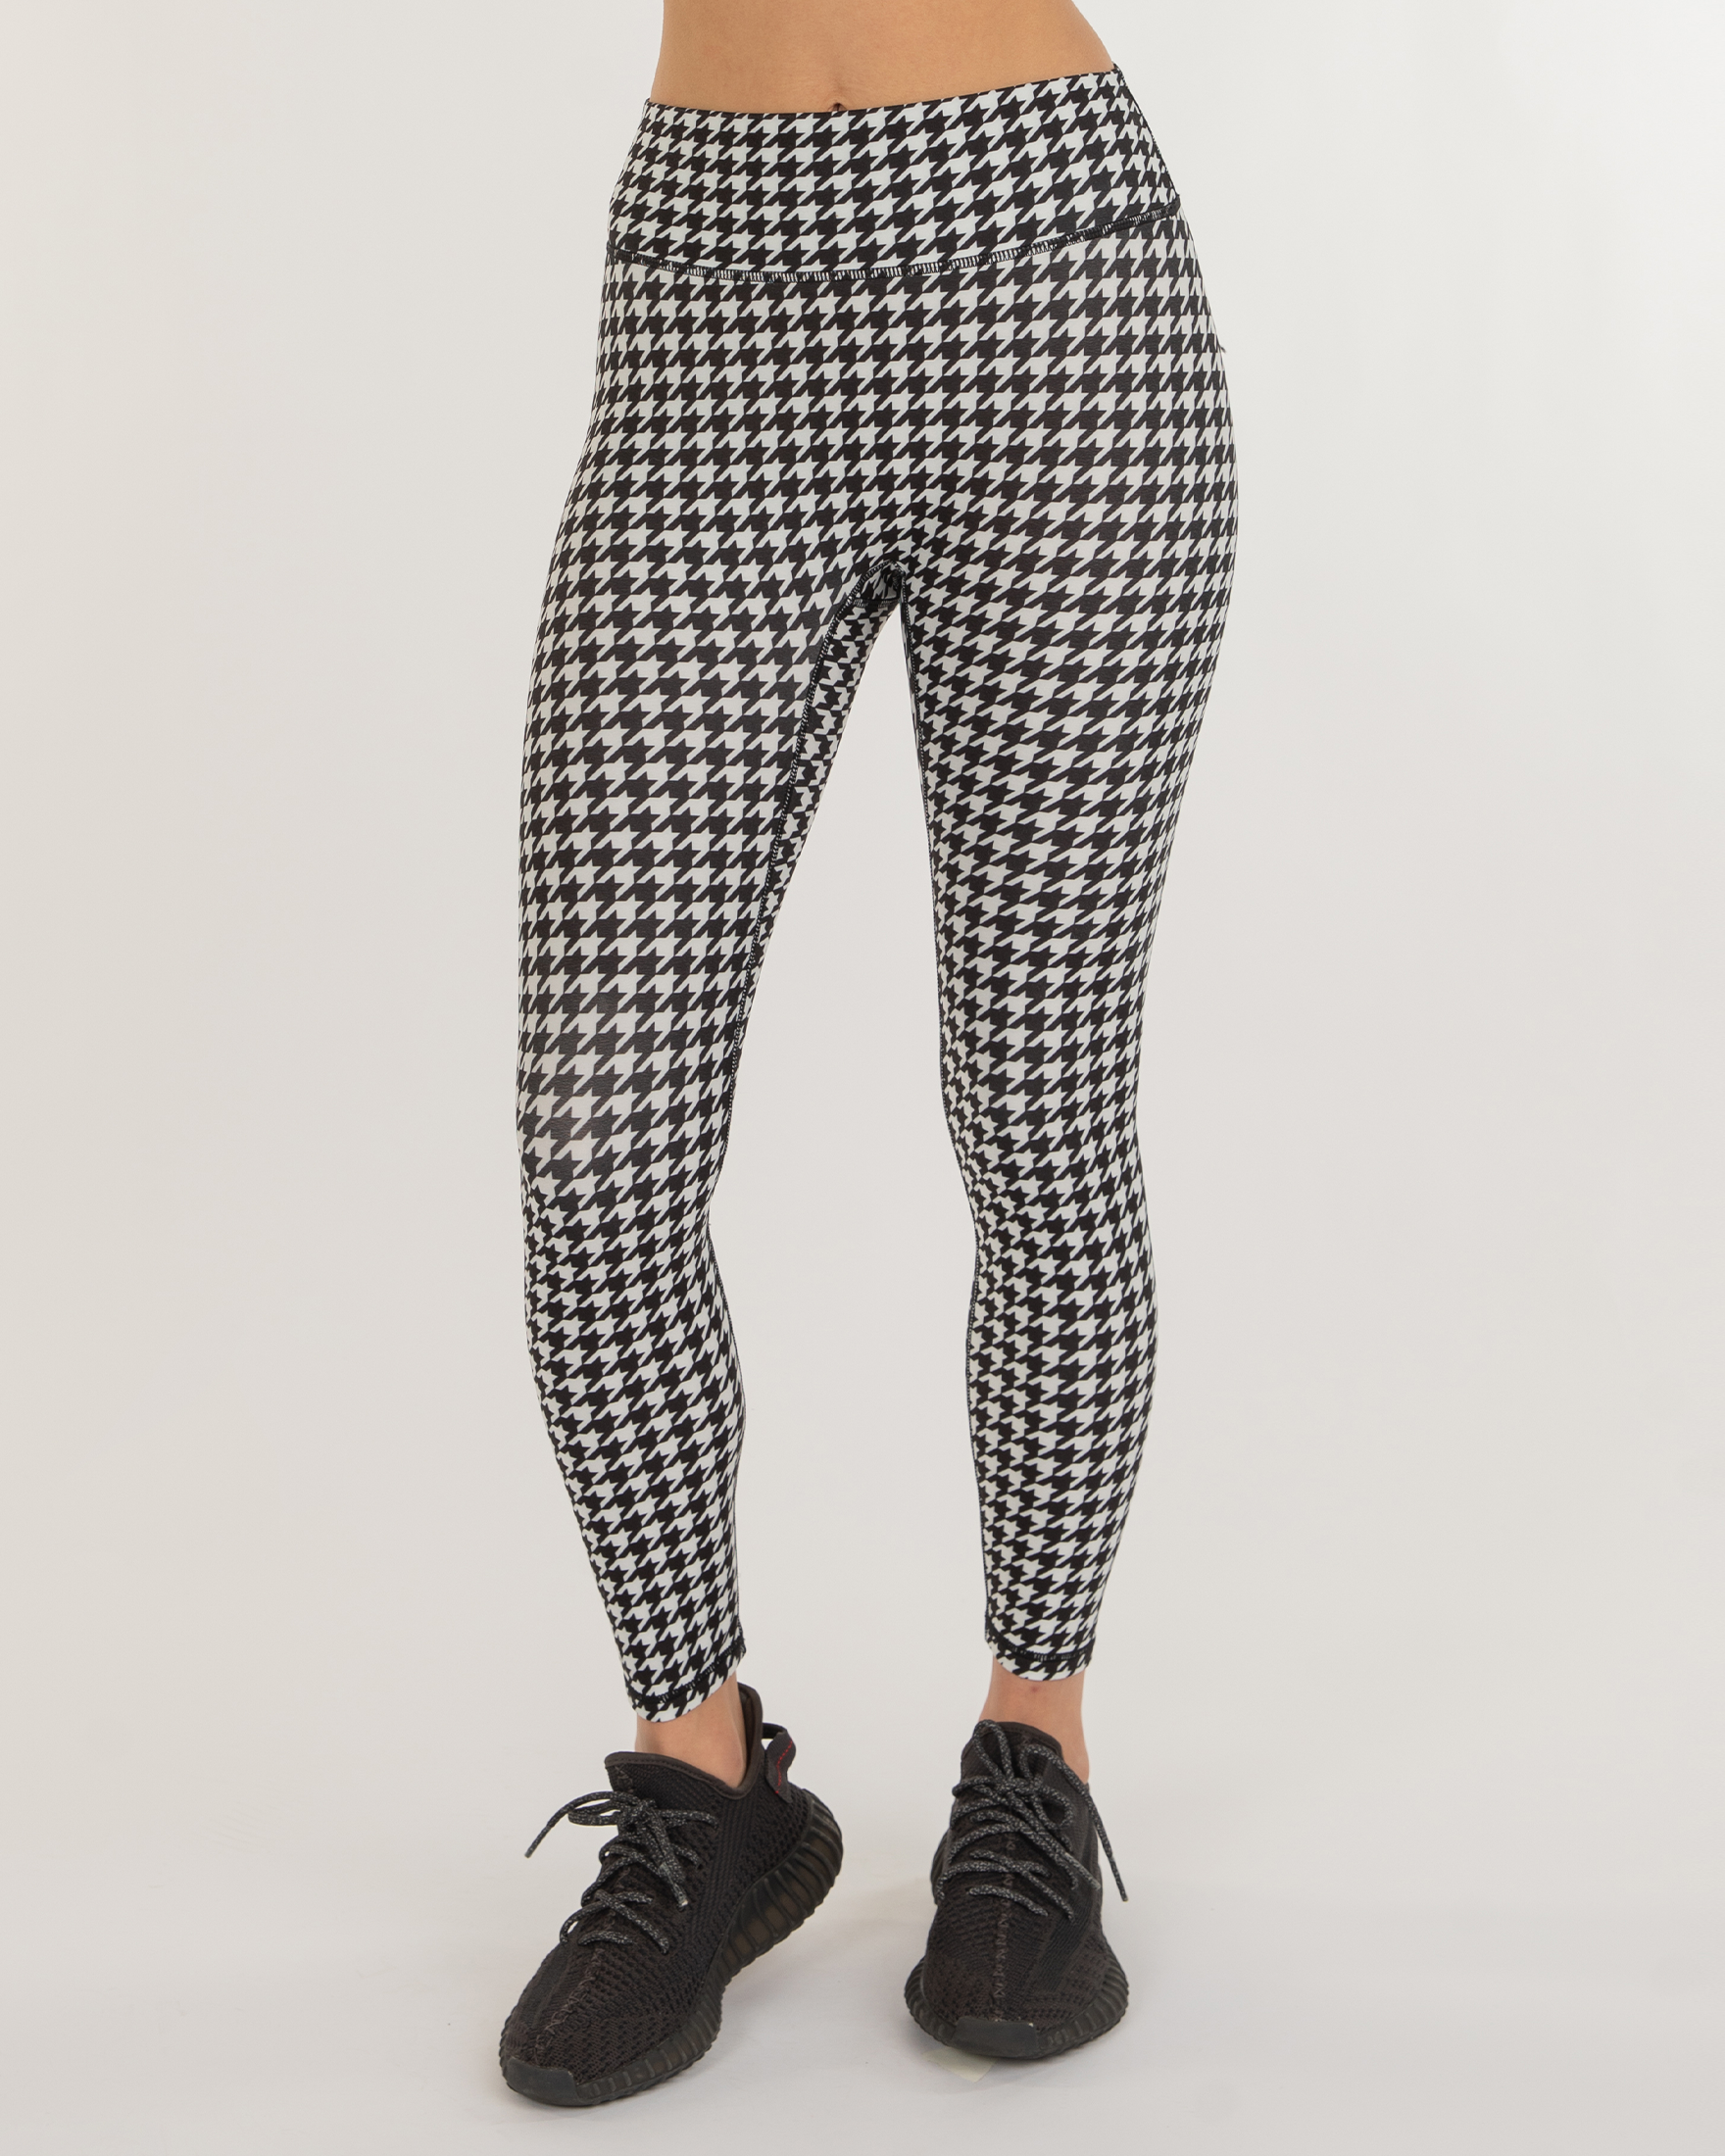 Crimson and houndstooth leggings. Made of a 95% polyester and 5% Spandex  blend. One size fits most., 970052